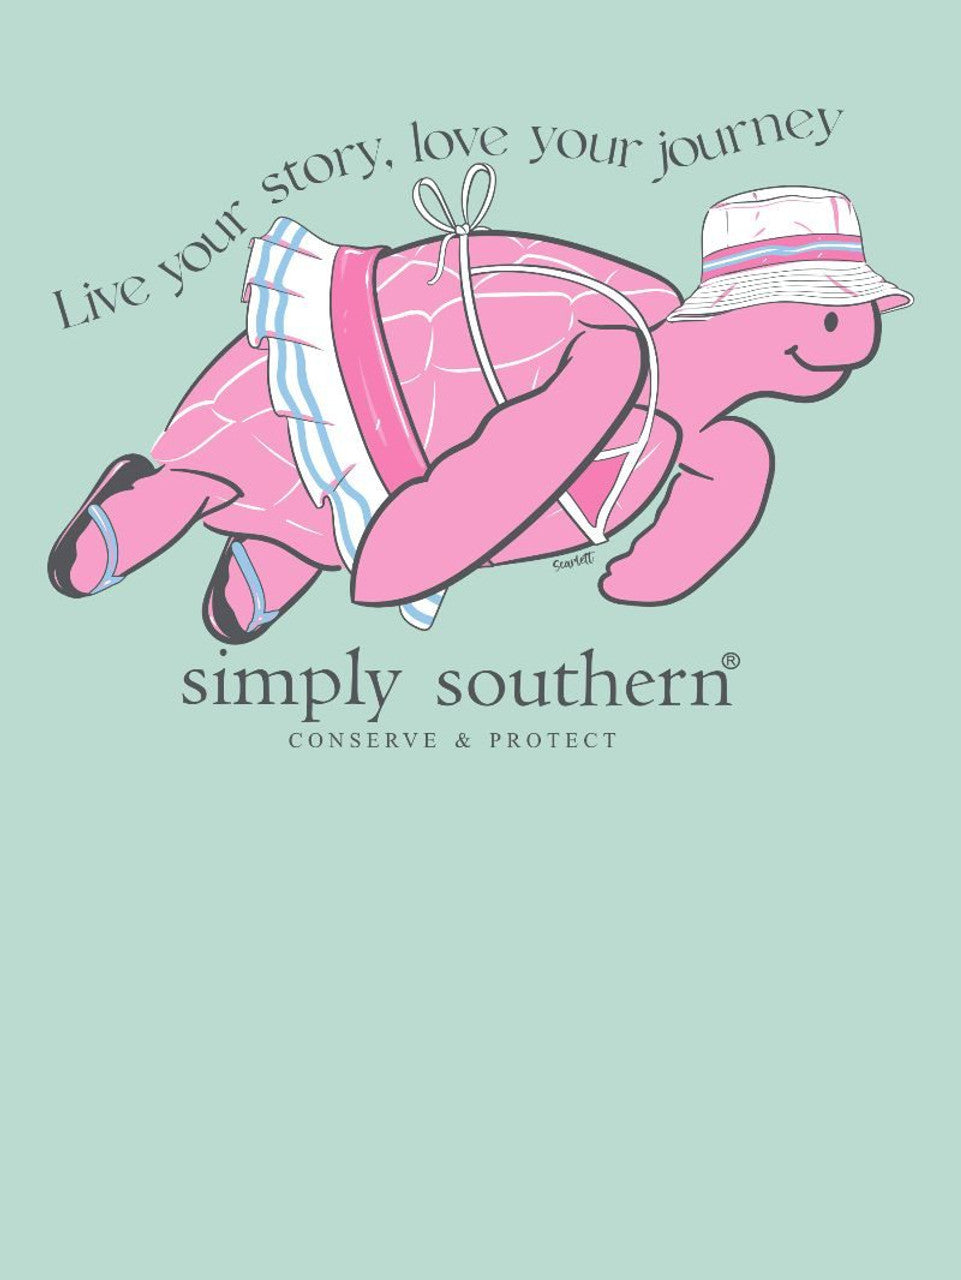 Simply Southern Live Your Story Youth SS Tee